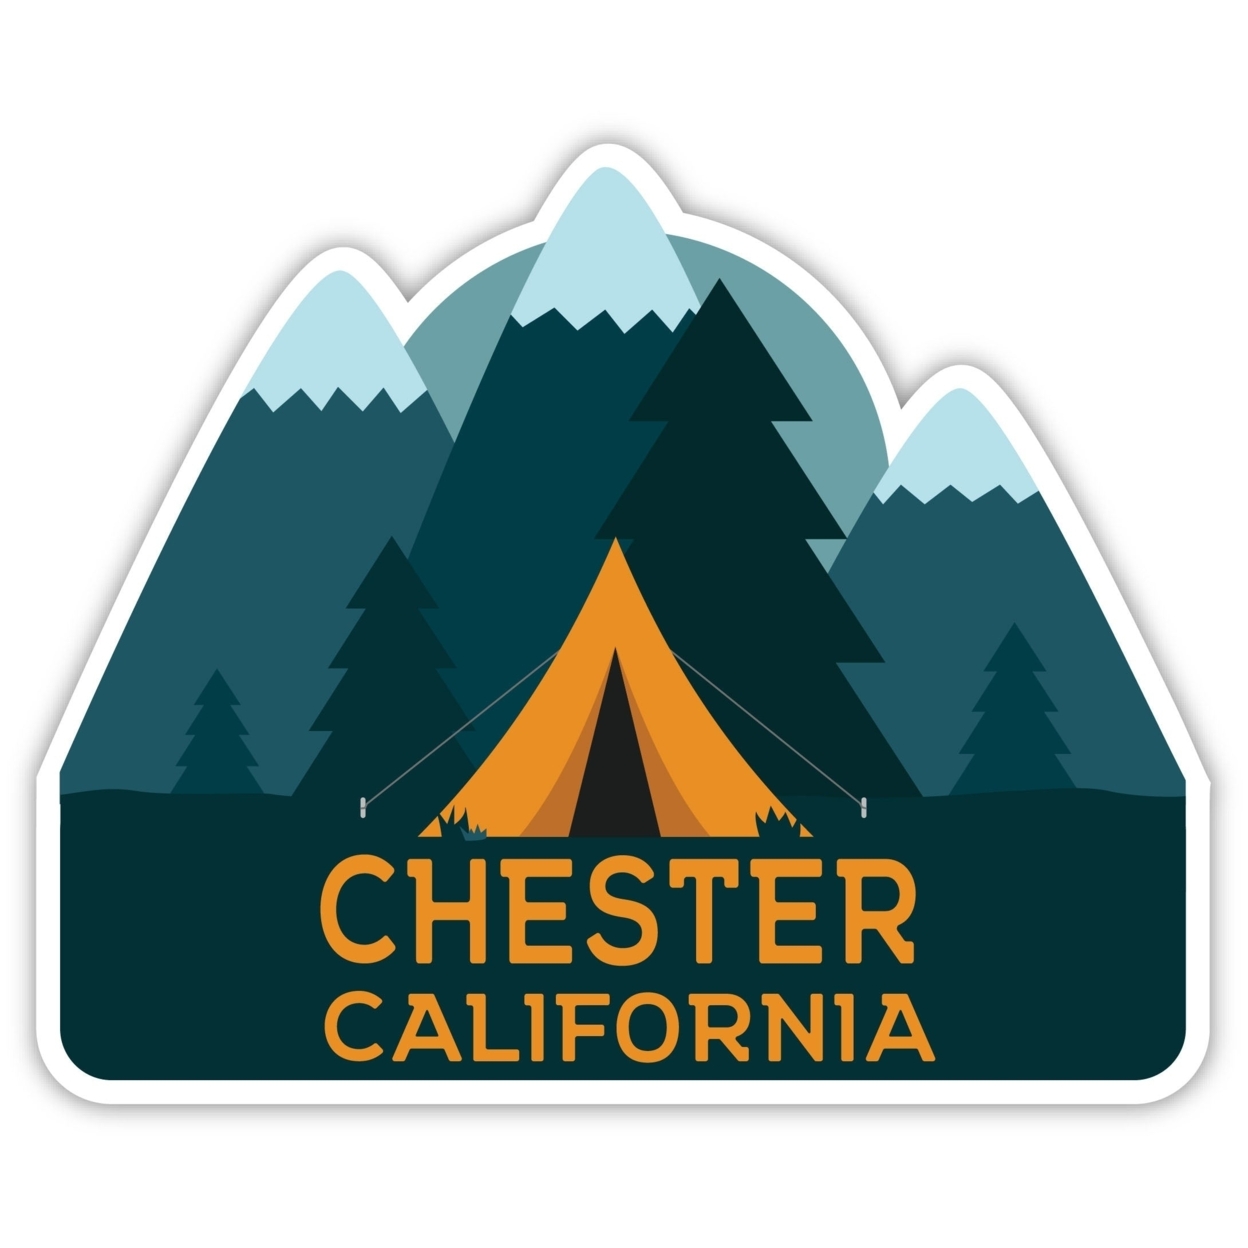 Chester California Souvenir Decorative Stickers (Choose Theme And Size) - 4-Pack, 6-Inch, Tent